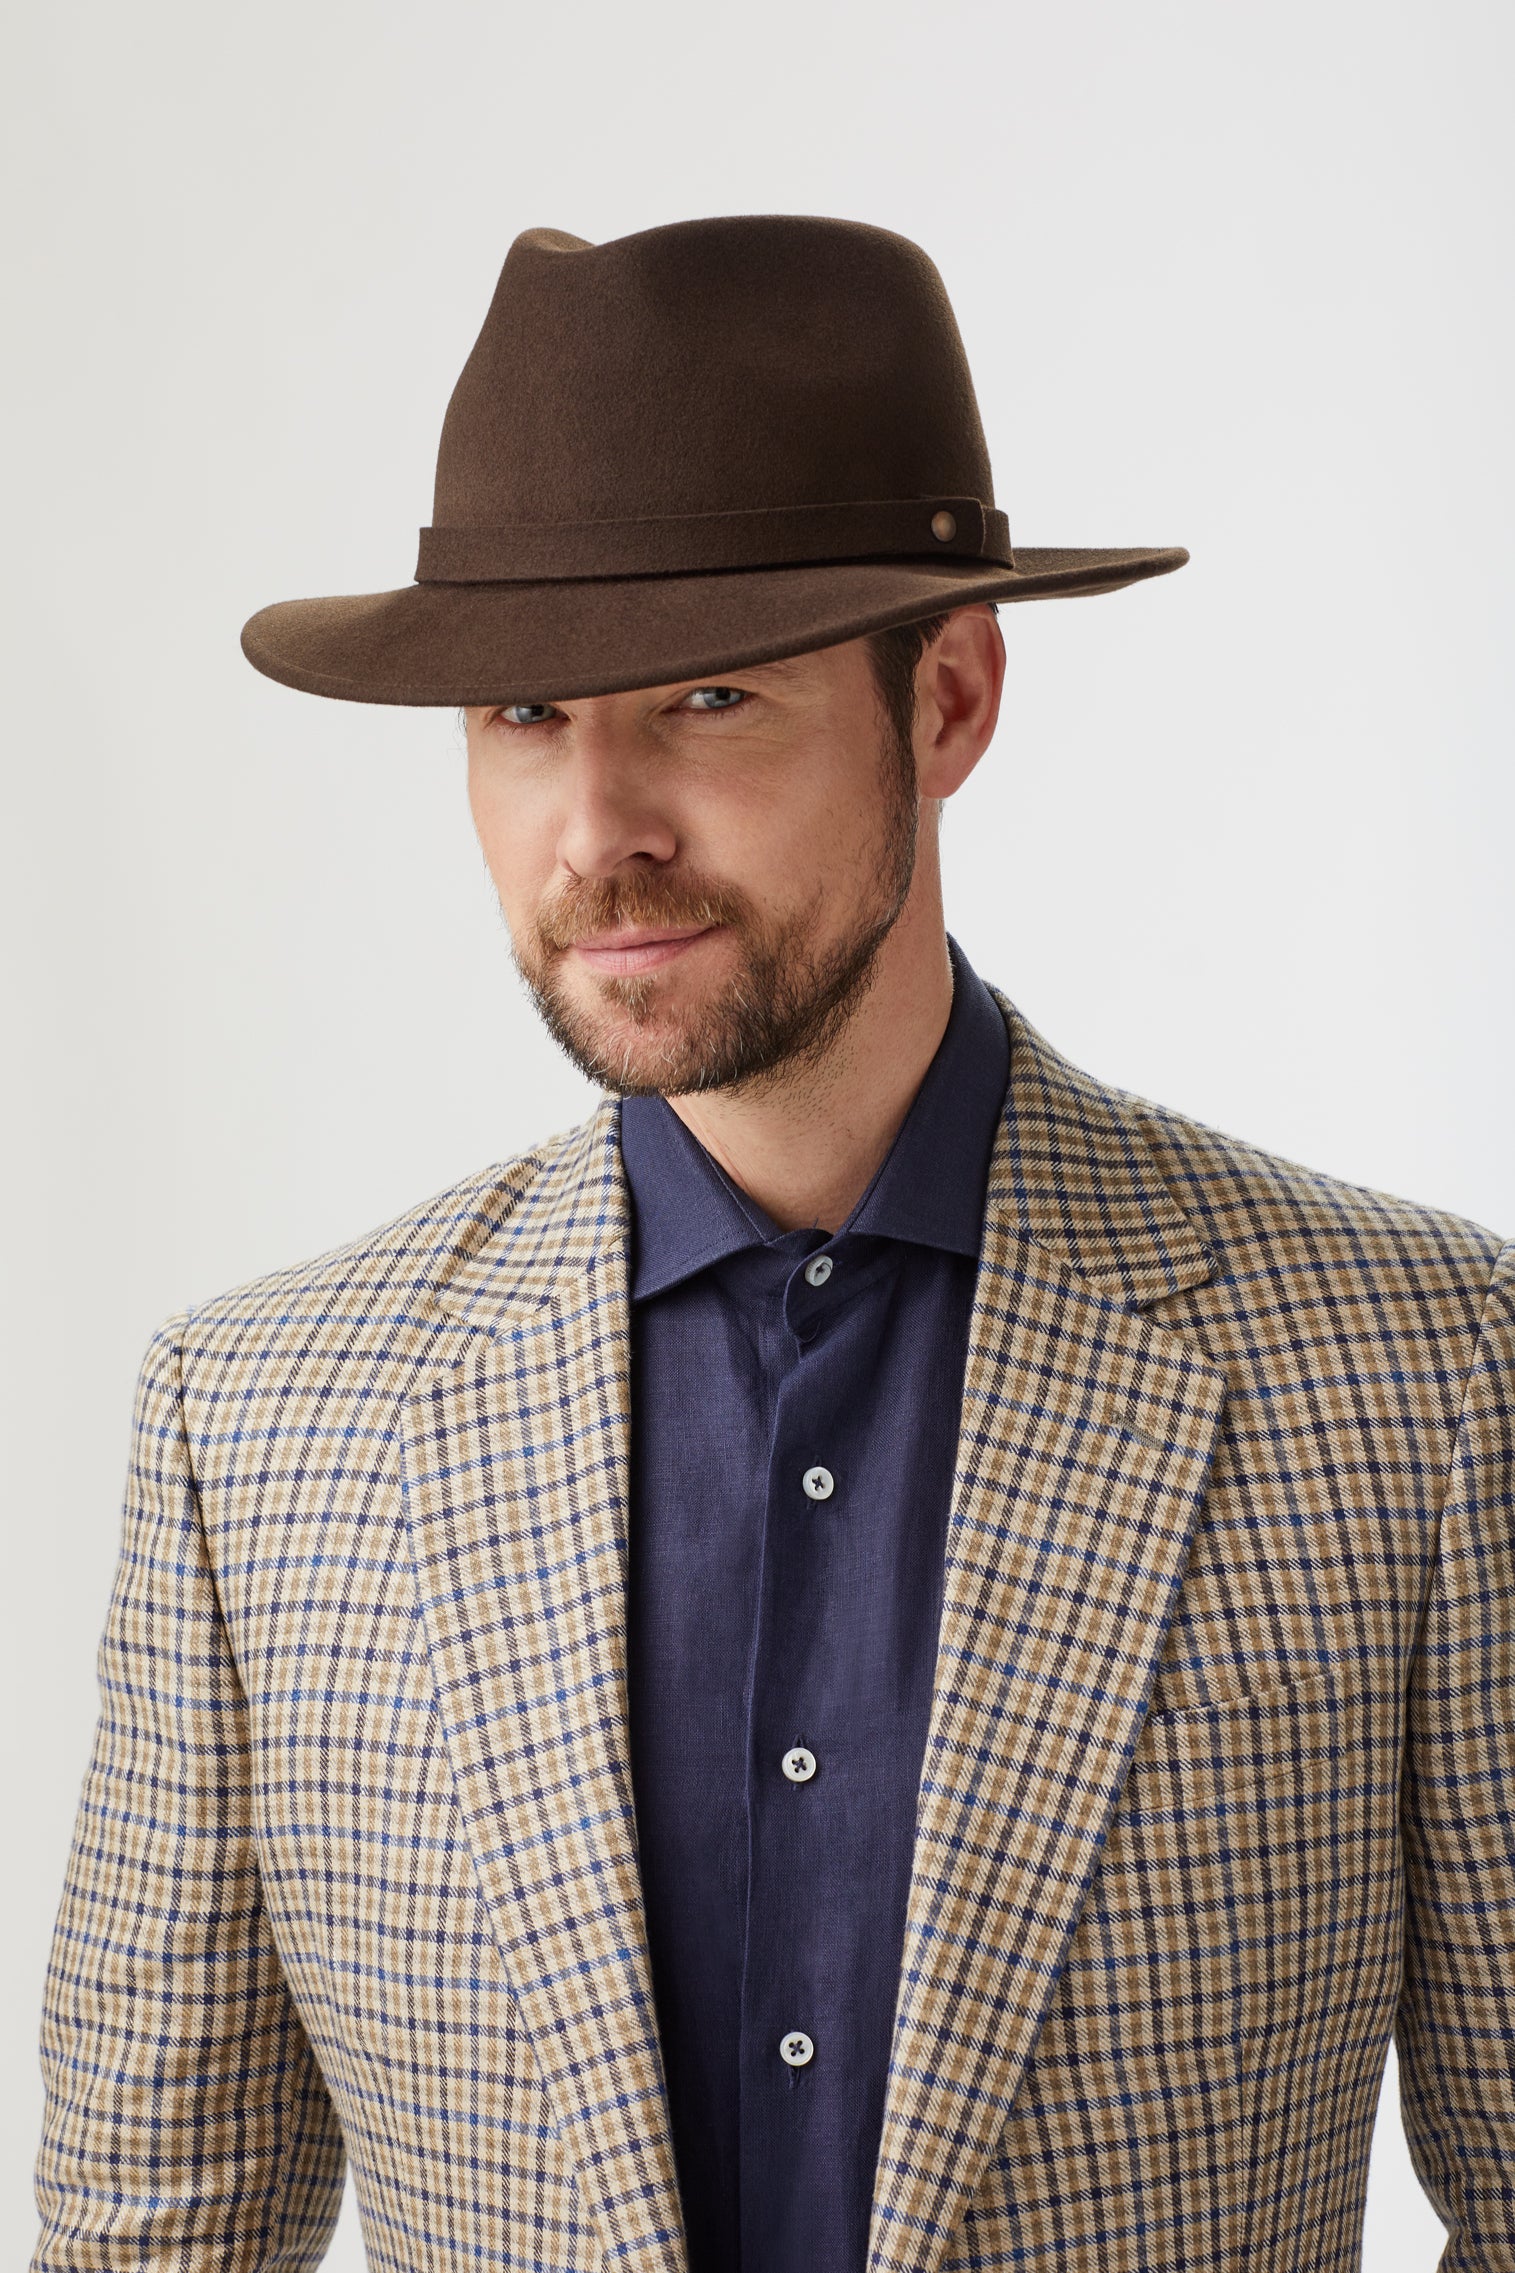 Nomad Rollable Trilby - Men's Hats - Lock & Co. Hatters London UK